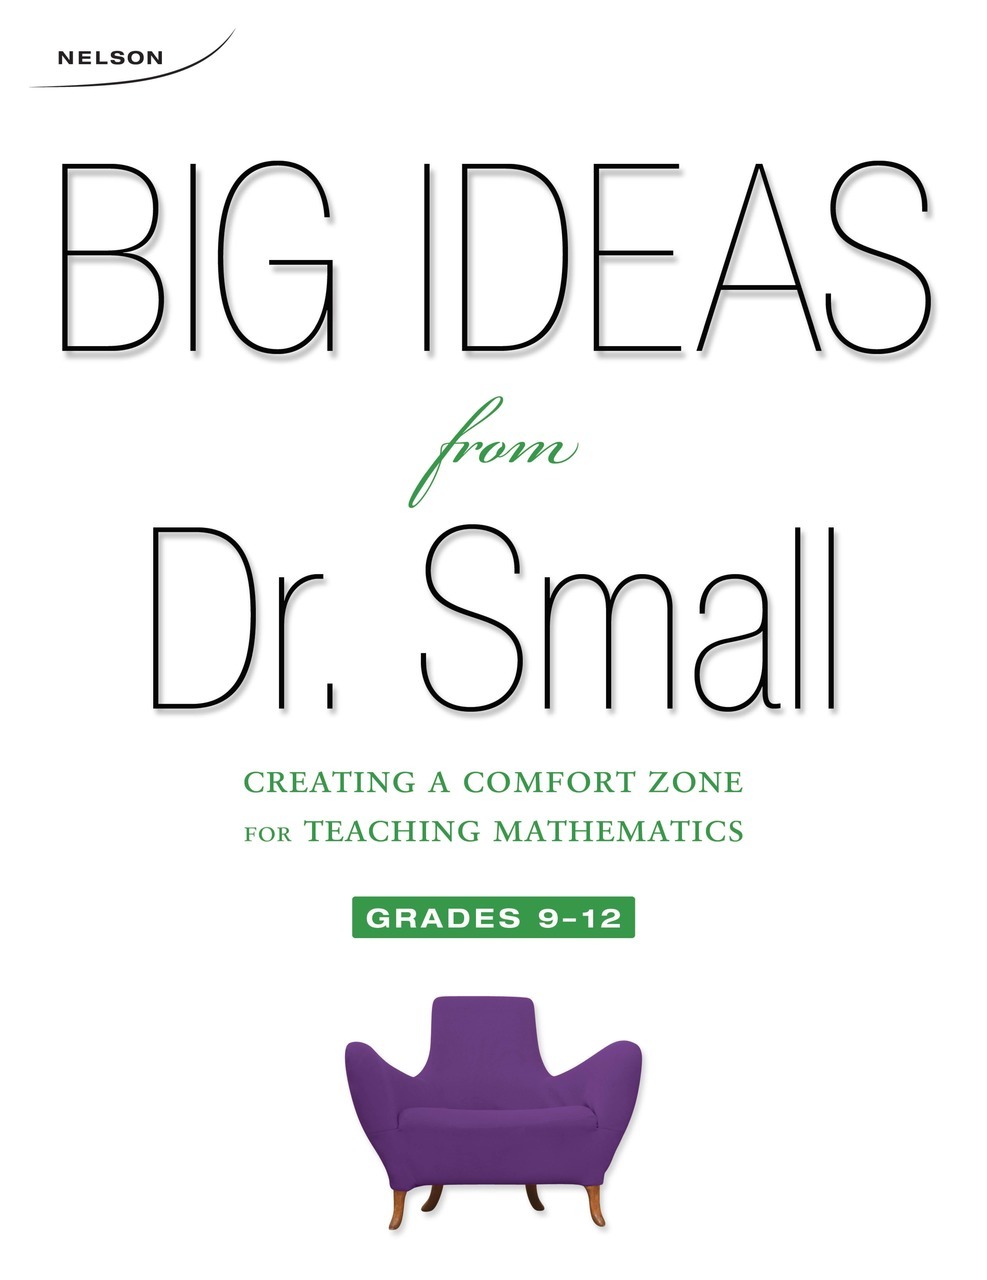 Big ideas from Dr. Small grades 9-12 : creating a comfort zone for teaching mathematics